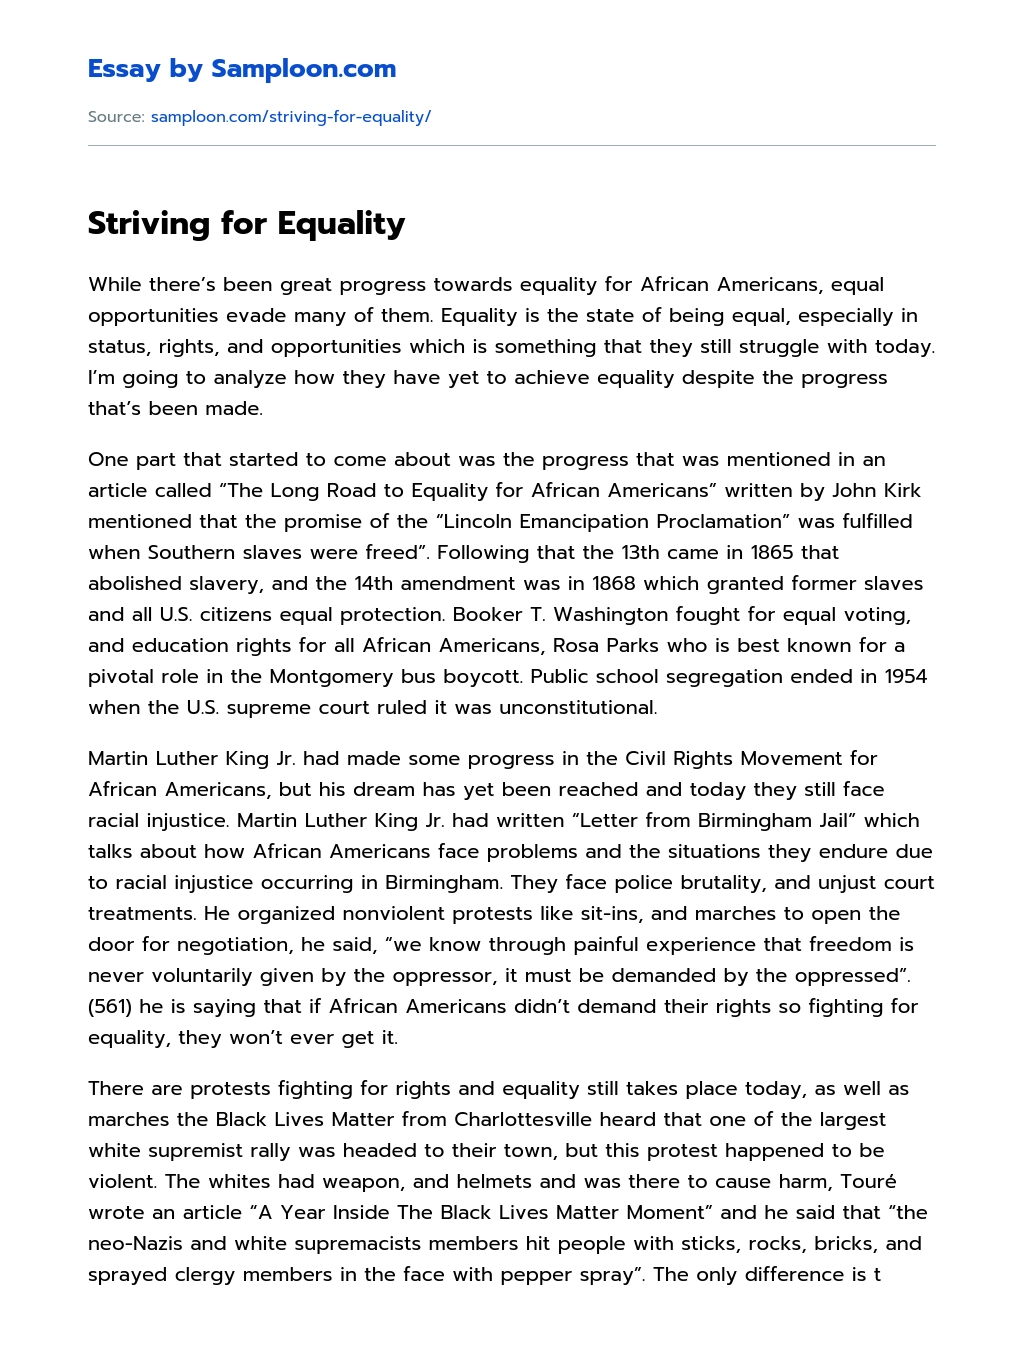 Striving for Equality essay